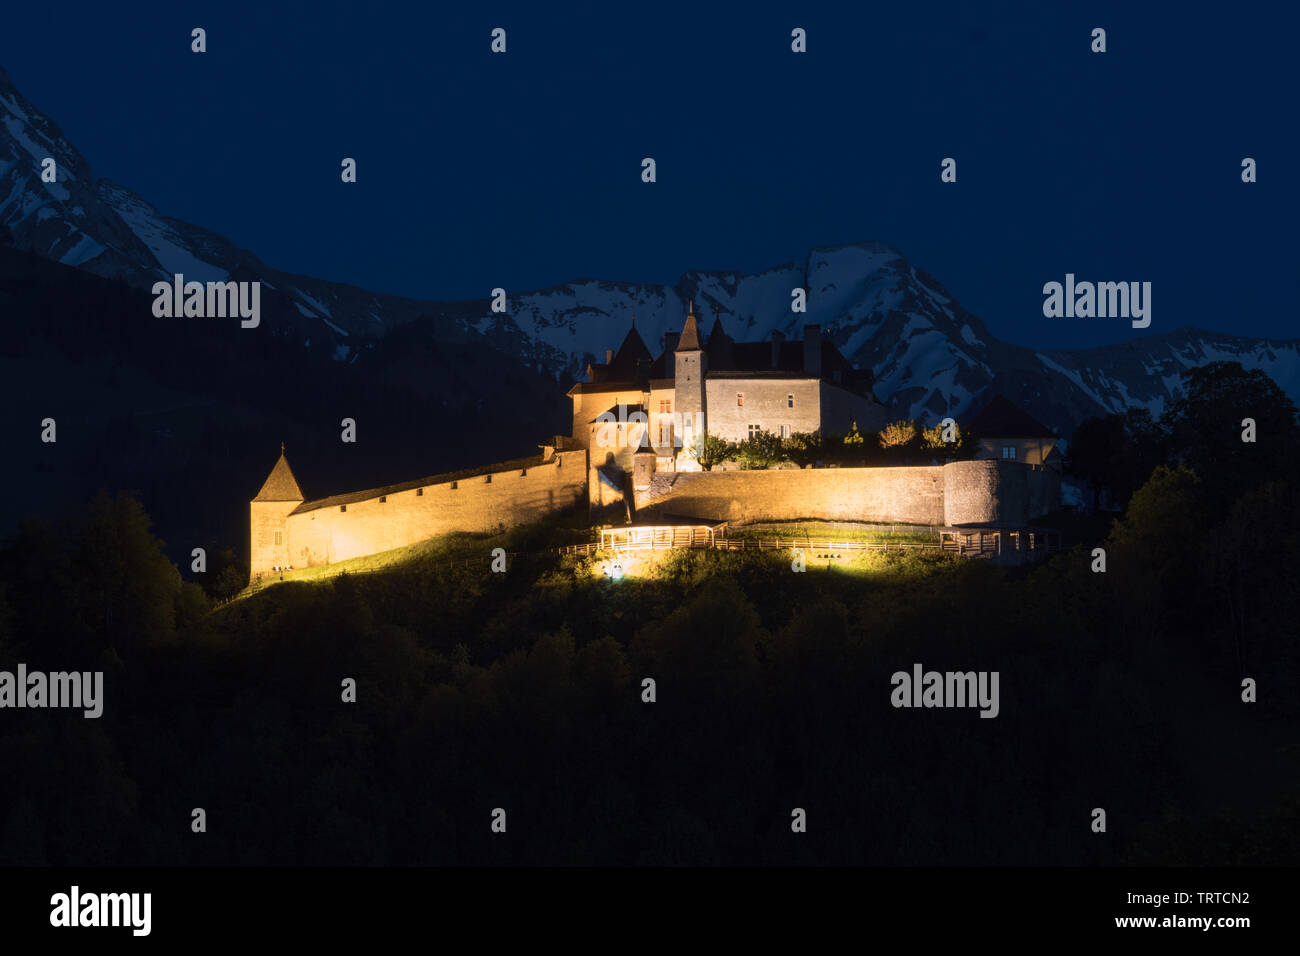 Gruyere, VD / Switzerland - 31 May 2019:  view the historic castle at Gruyere with snowcapped mountain landscape at twilight Stock Photo